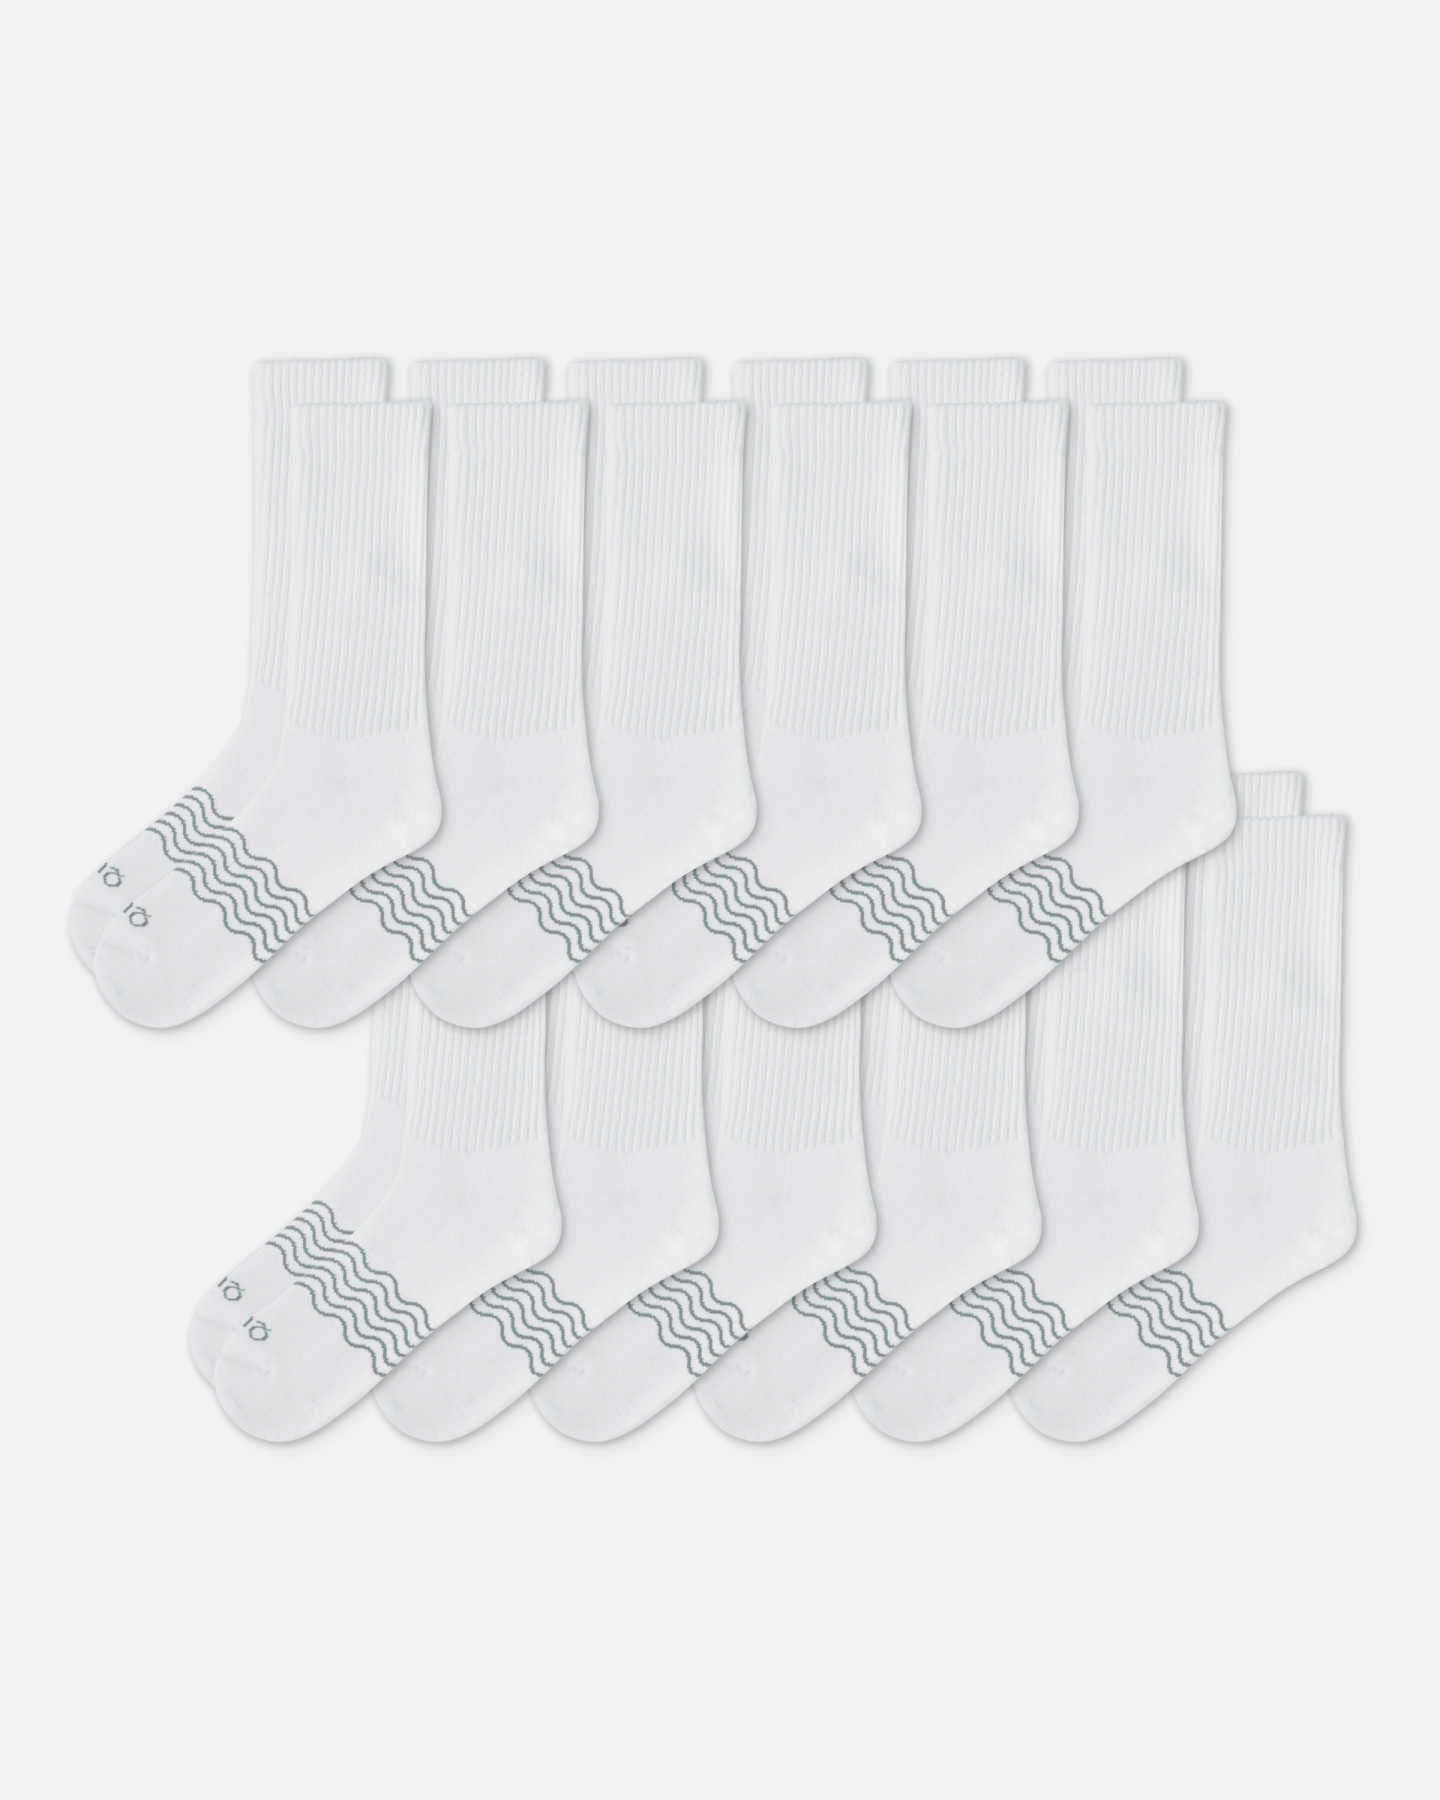 You May Also Like - Organic Crew Socks (12-pack) - White